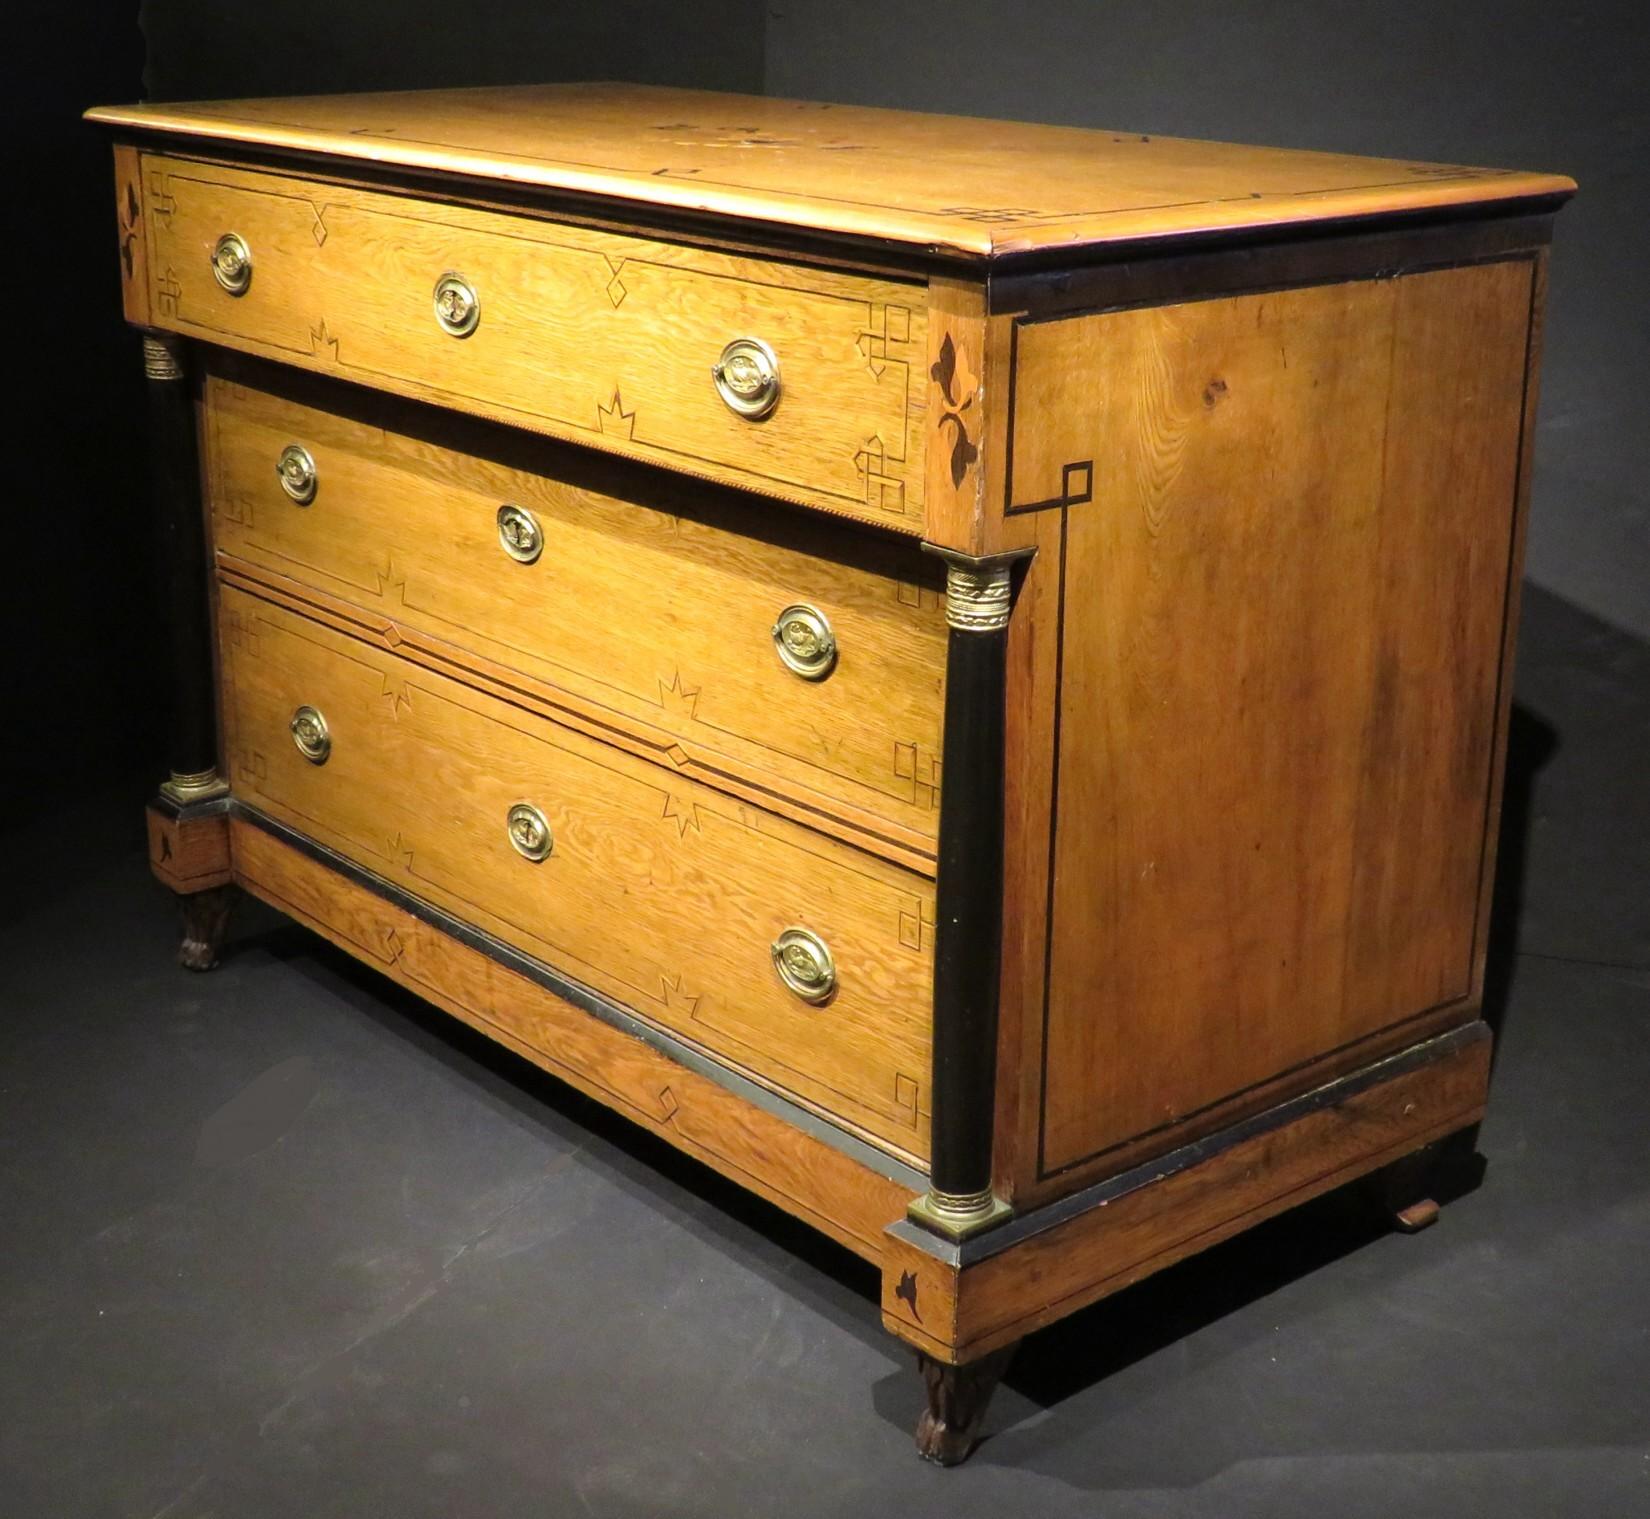 A very handsome & capacious three drawer commode in highly grained ash, the top inlaid with rectilinear parquetry motifs in German walnut, surrounding a heart-shaped marquetry motif centred by a silvered Christogram (IHS), intersected by marquetry